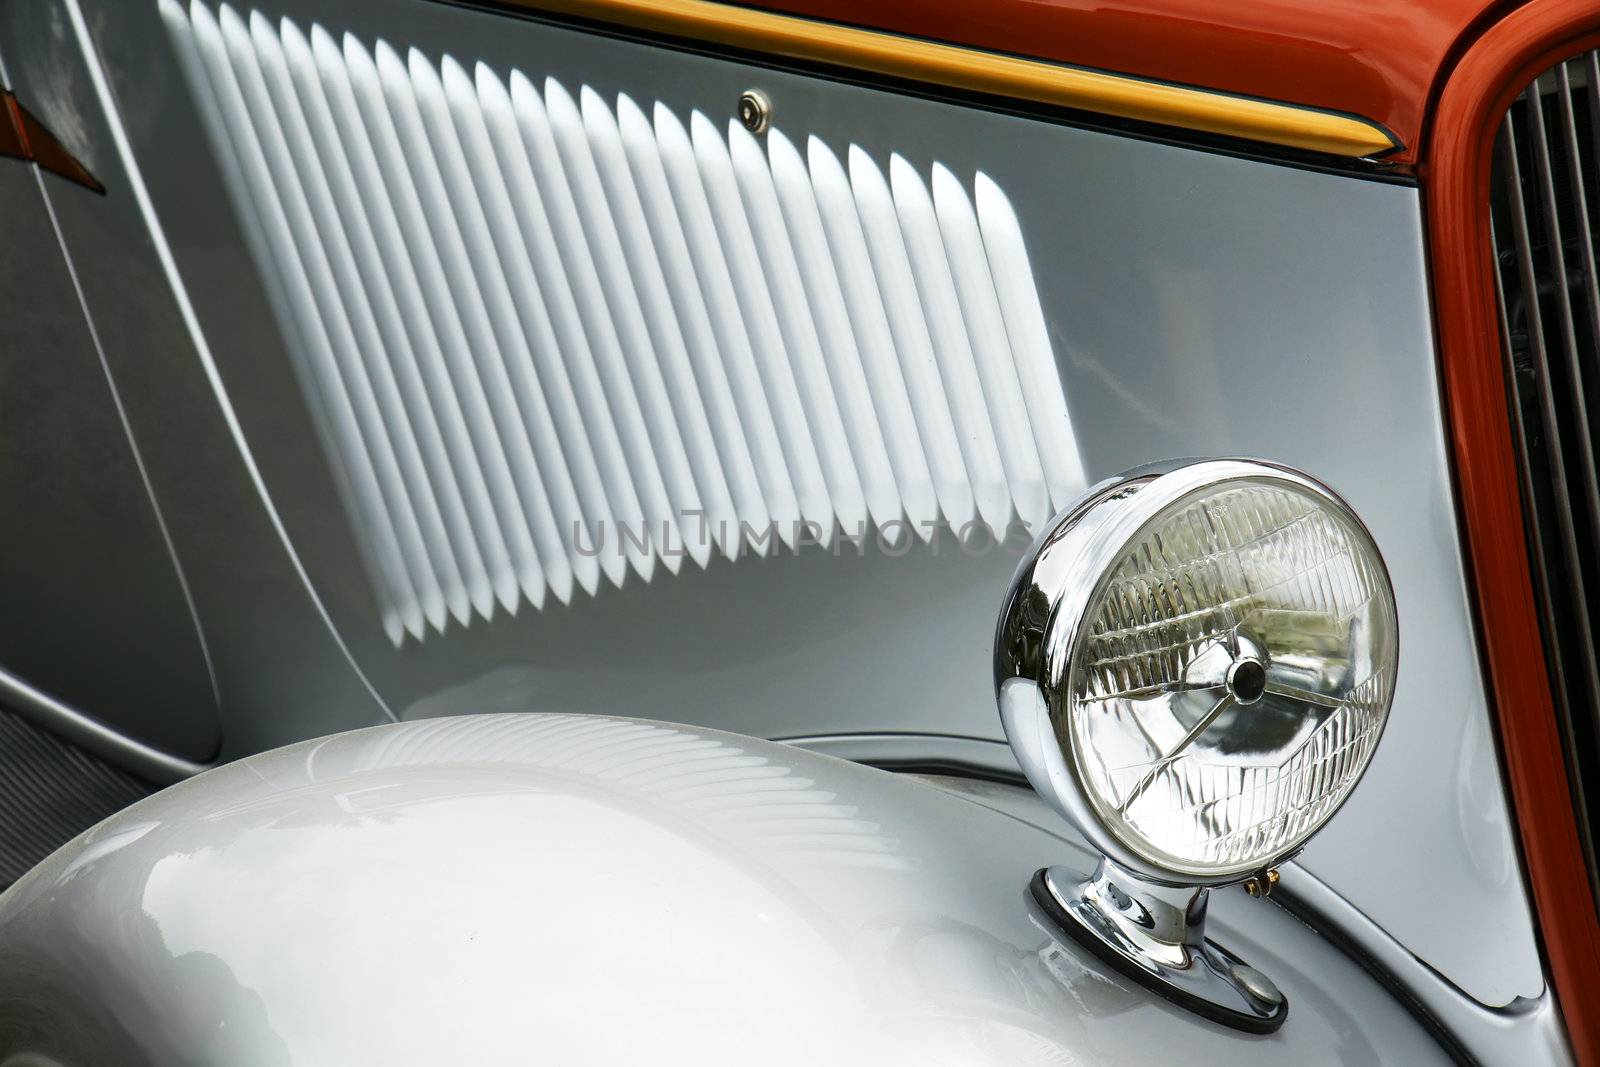 Detail of old silver collectible car,cool light reflections.